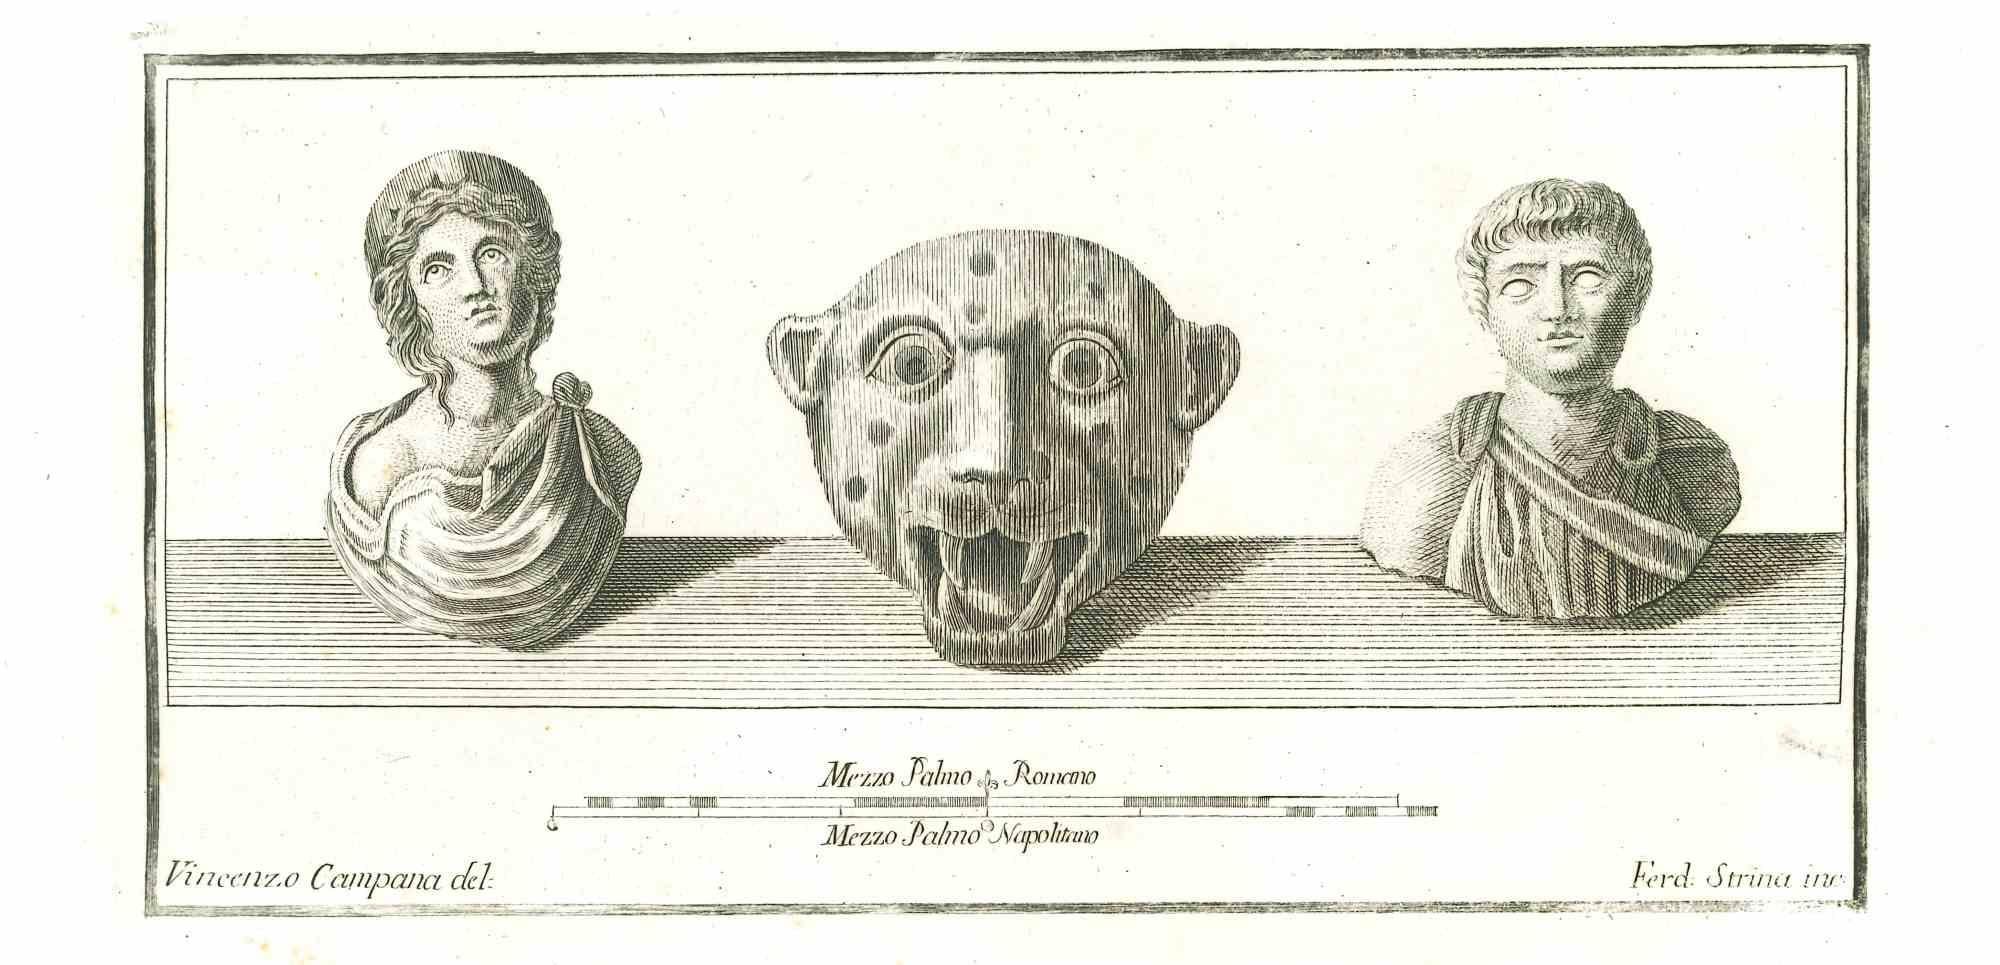 Ancient Roman Statue, from the series "Antiquities of Herculaneum", is an original etching on paper realized by Fernando Strina in the 18th century.

Signed on the plate on the lower right

Good conditions but aged.

 

The etching belongs to the